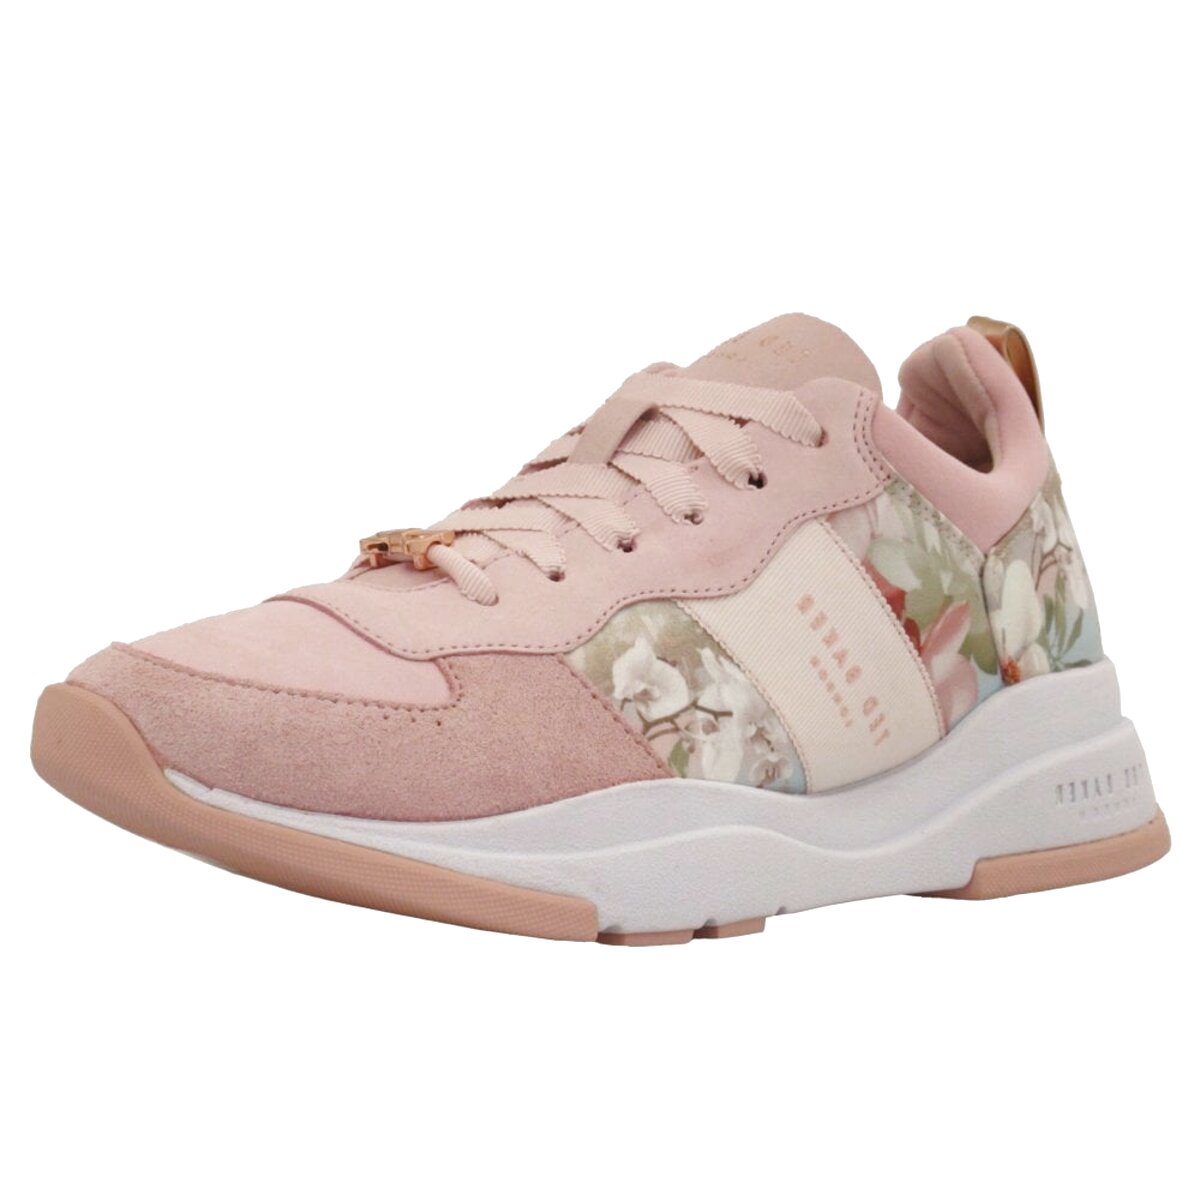 Ted Baker Womens Trainers for sale in 